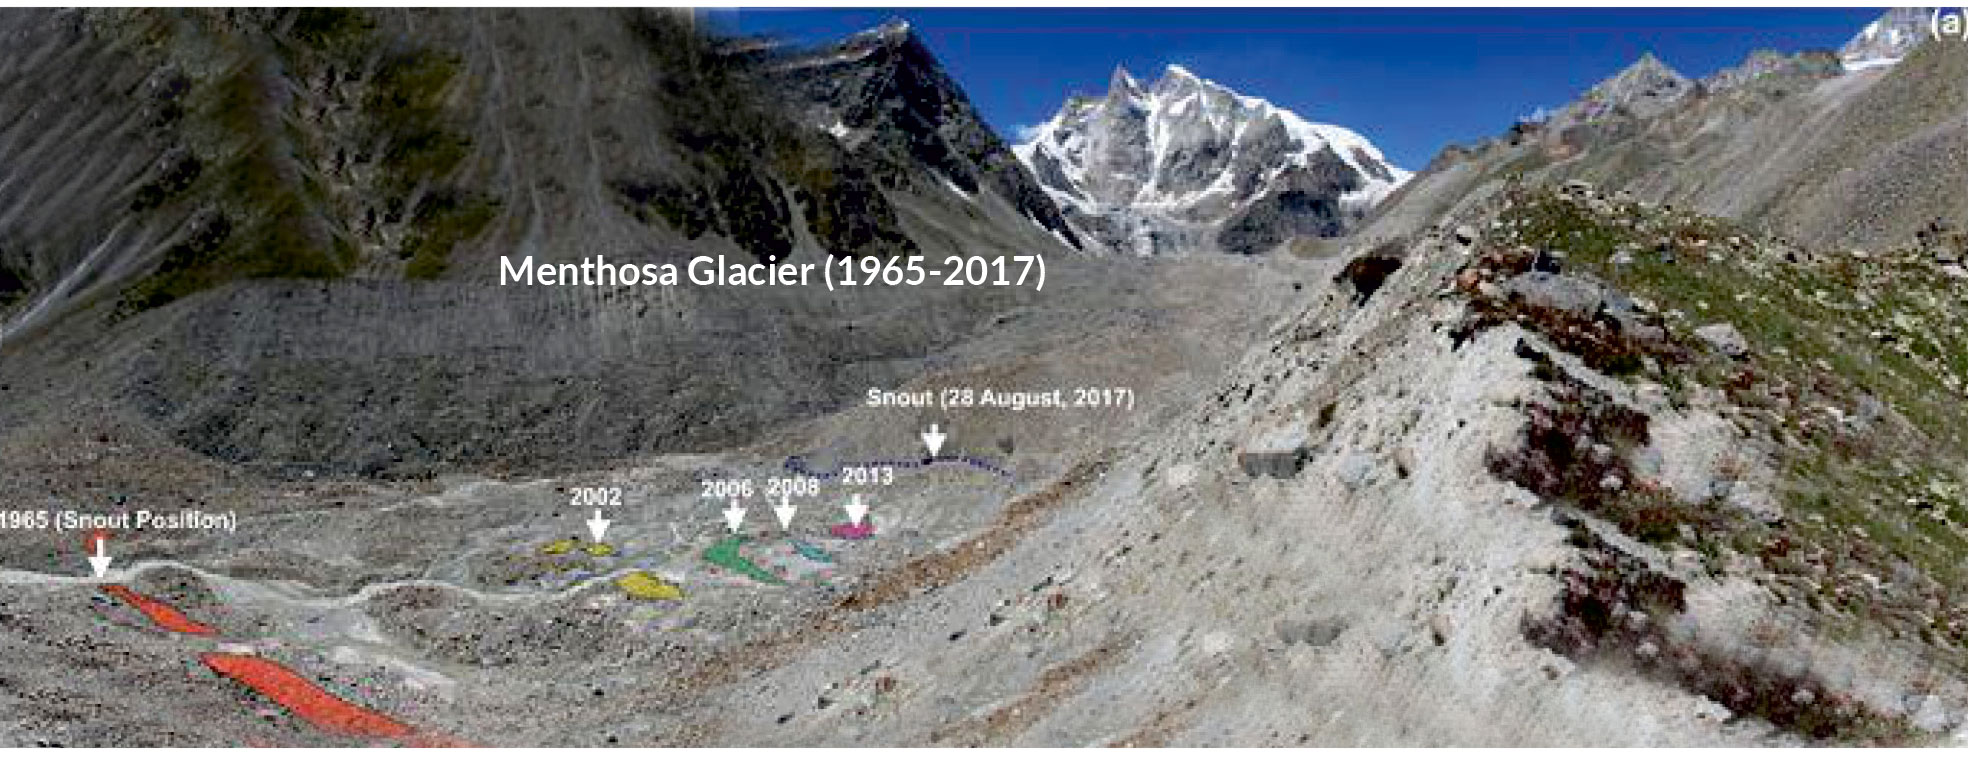 Assessment of Decadus Terminus Position changes & Ice thickness measurement by RIS Plus GPR for Menthosa Glacier